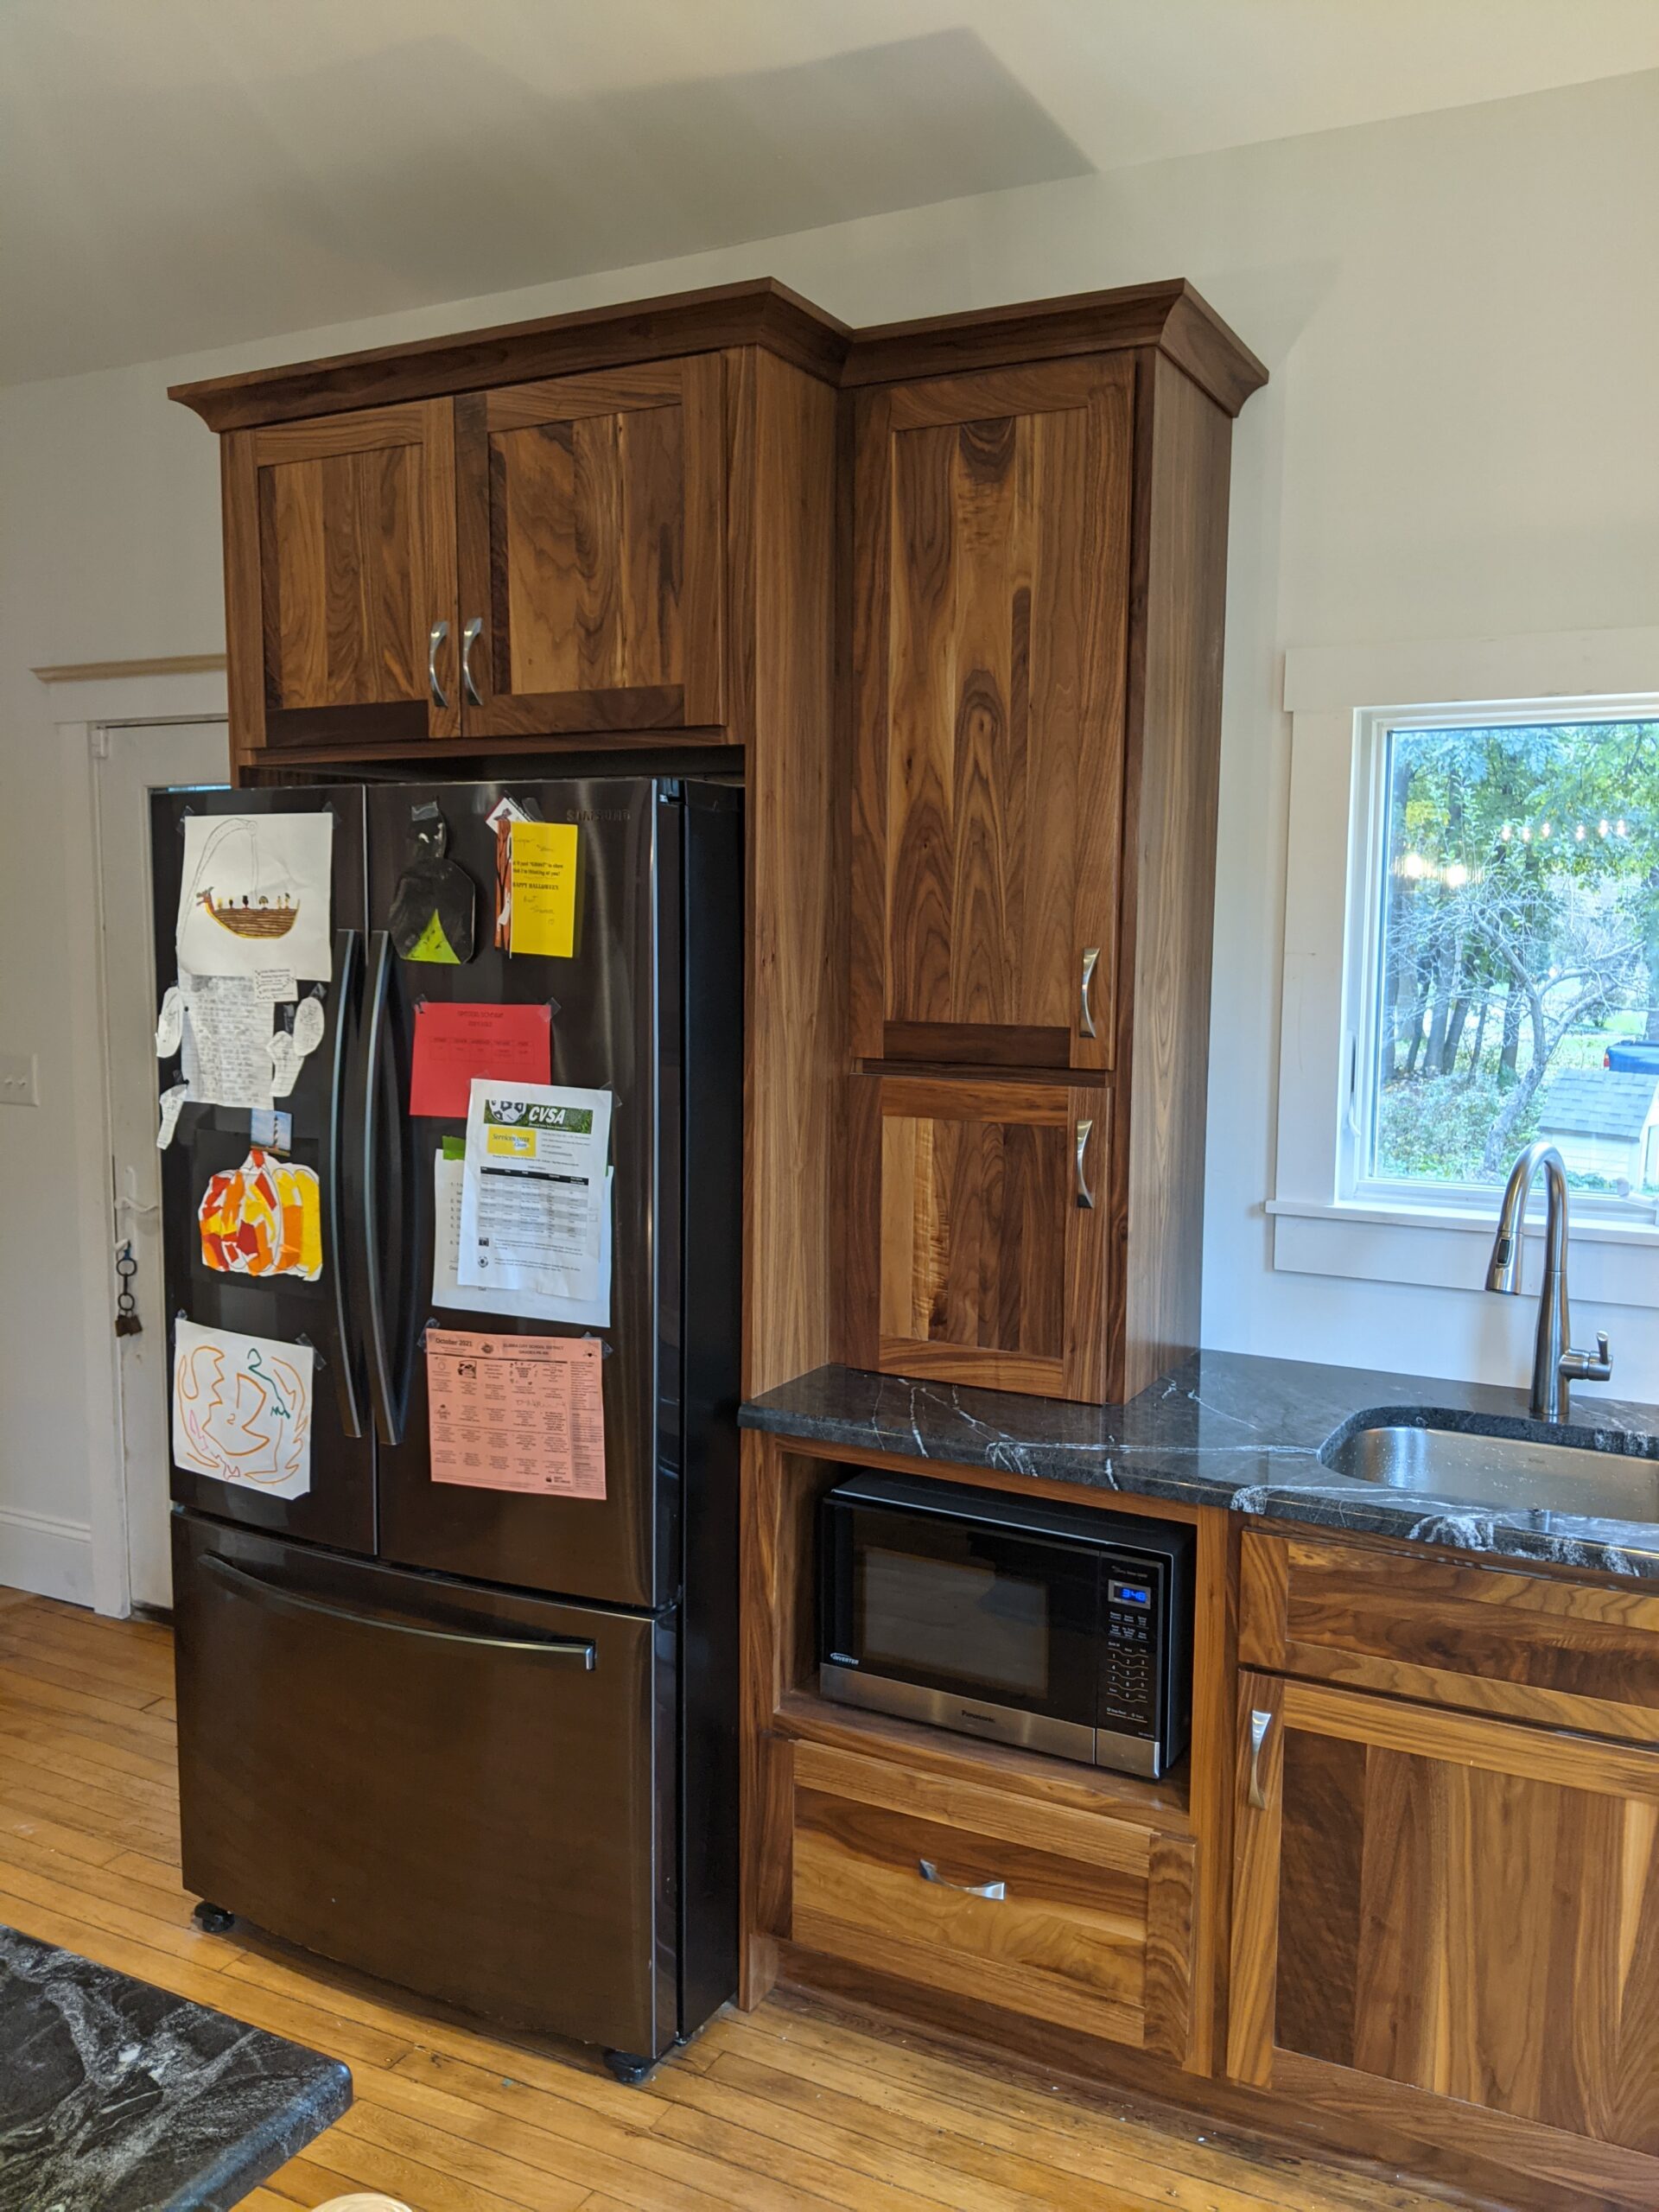 After picture showing the new refrigerator, microwave, coffee area